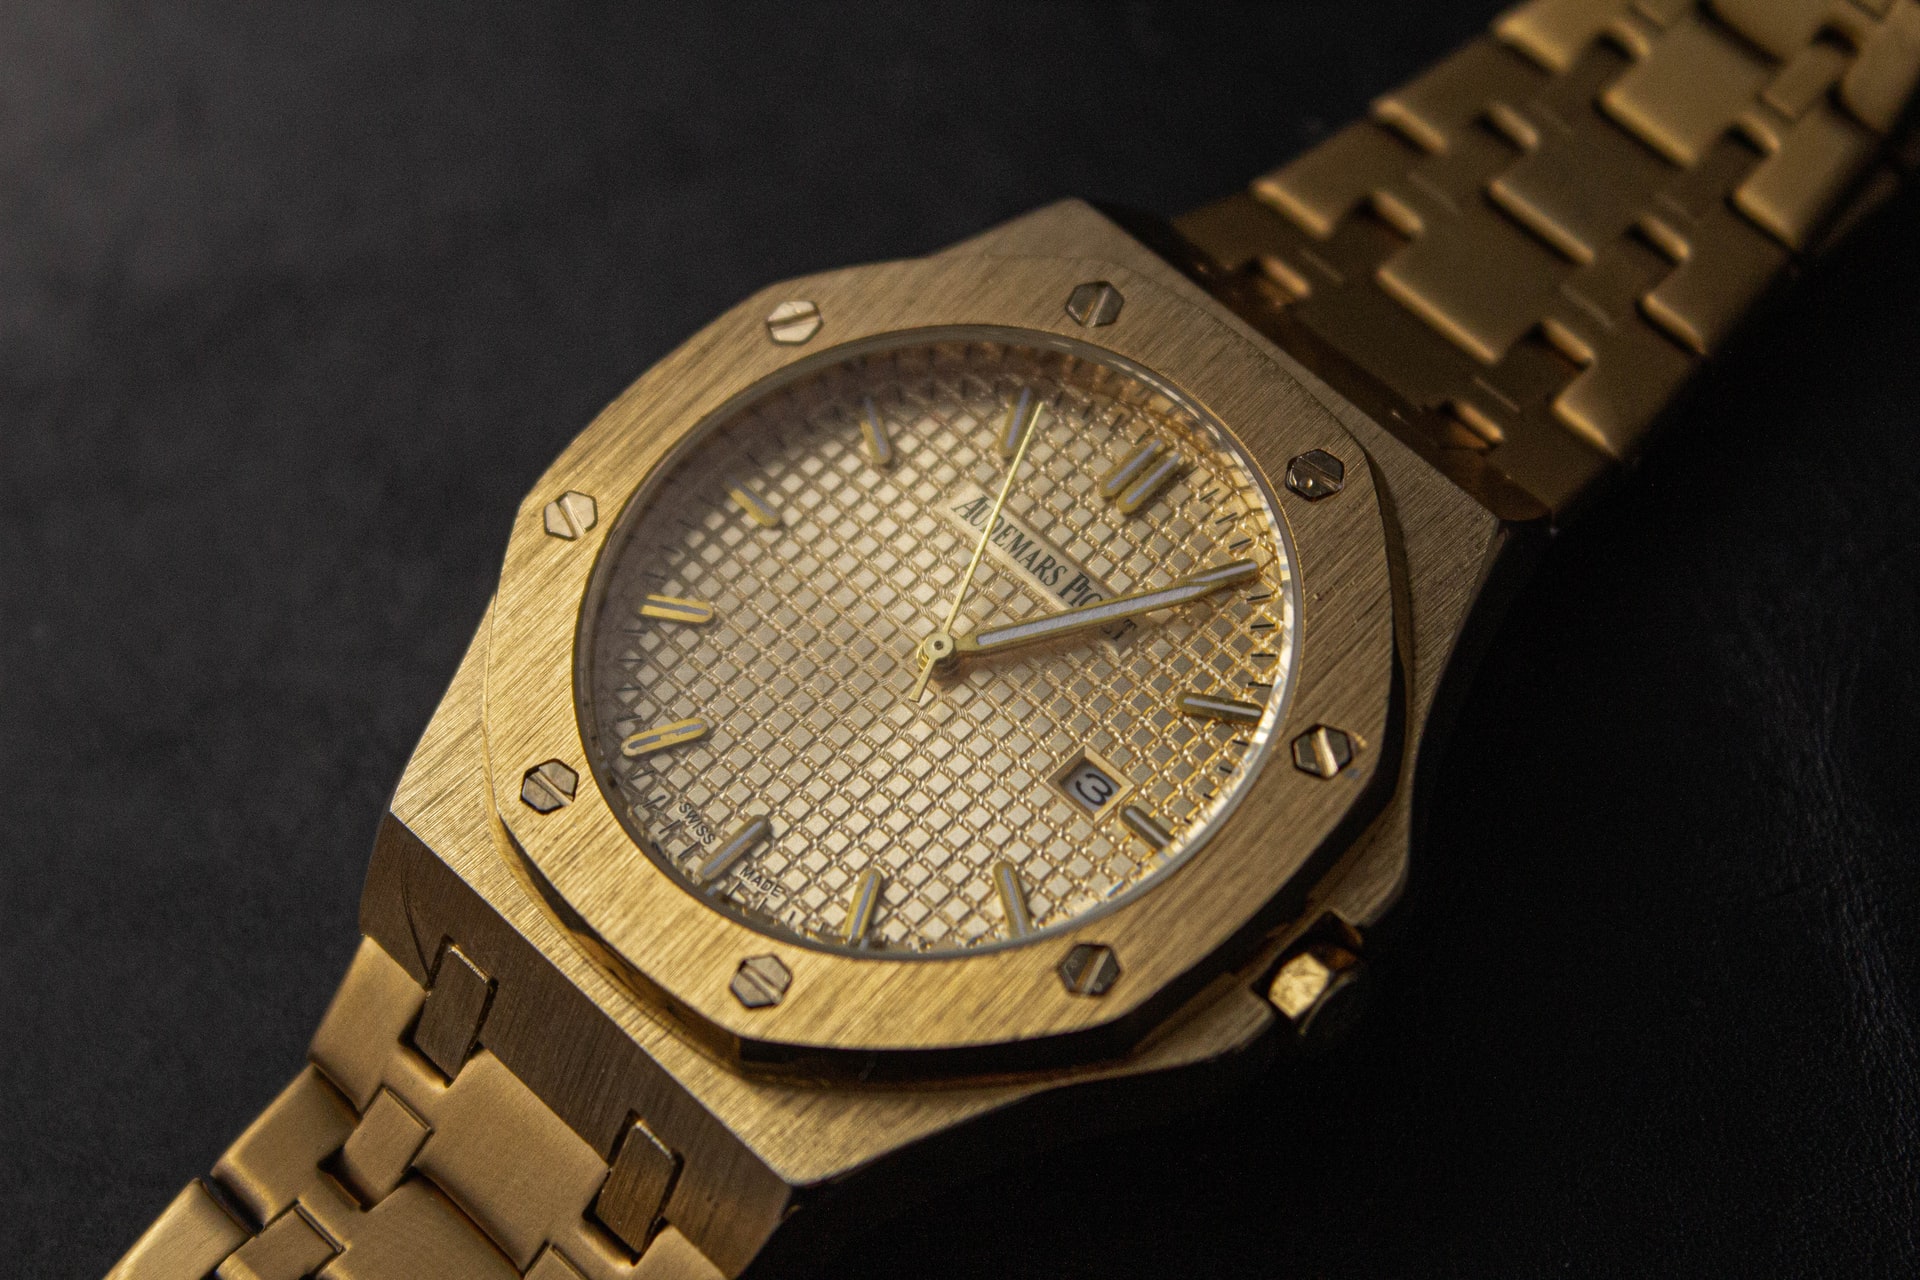 intersting facts and things about the Audemars Piguet company